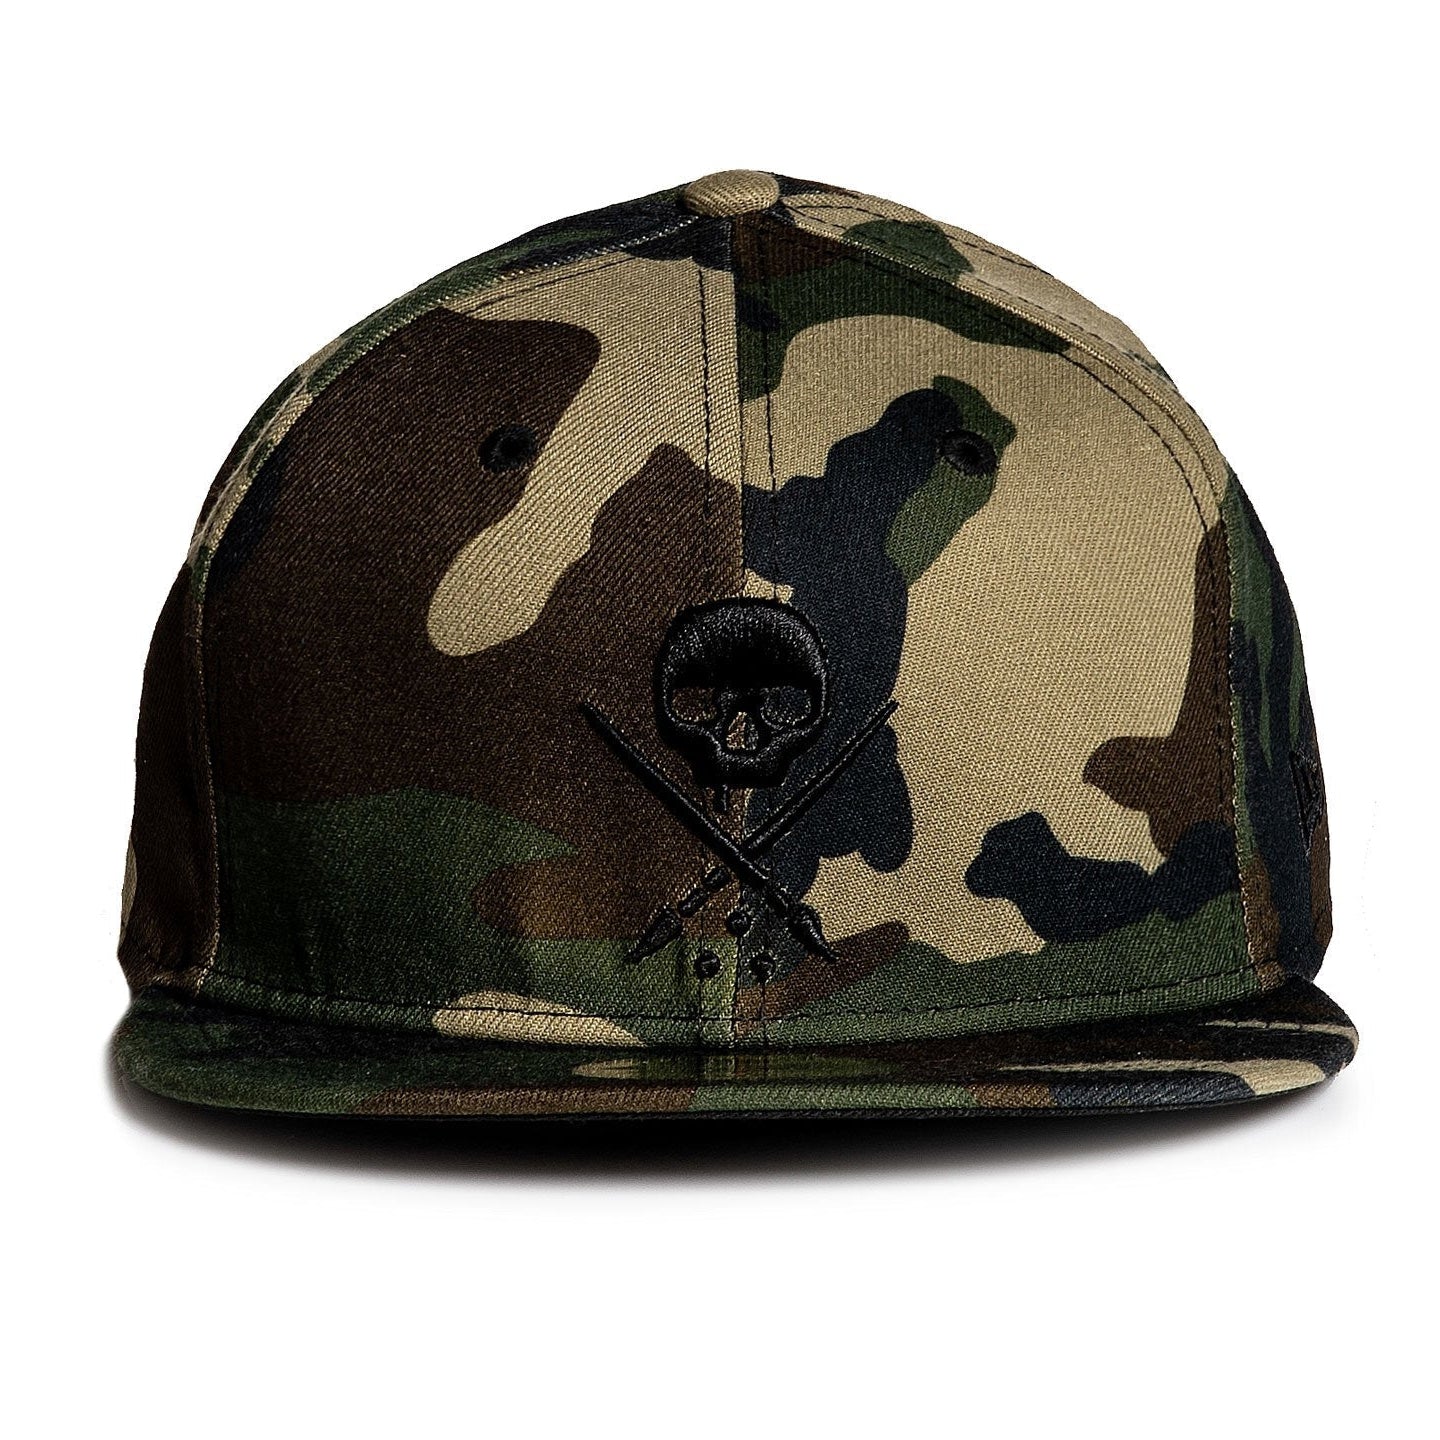 Sullen Badge Camo Stretched Fitted Cap-Mens Beanies, Hats & Snapback Caps-Scarlett Dawn